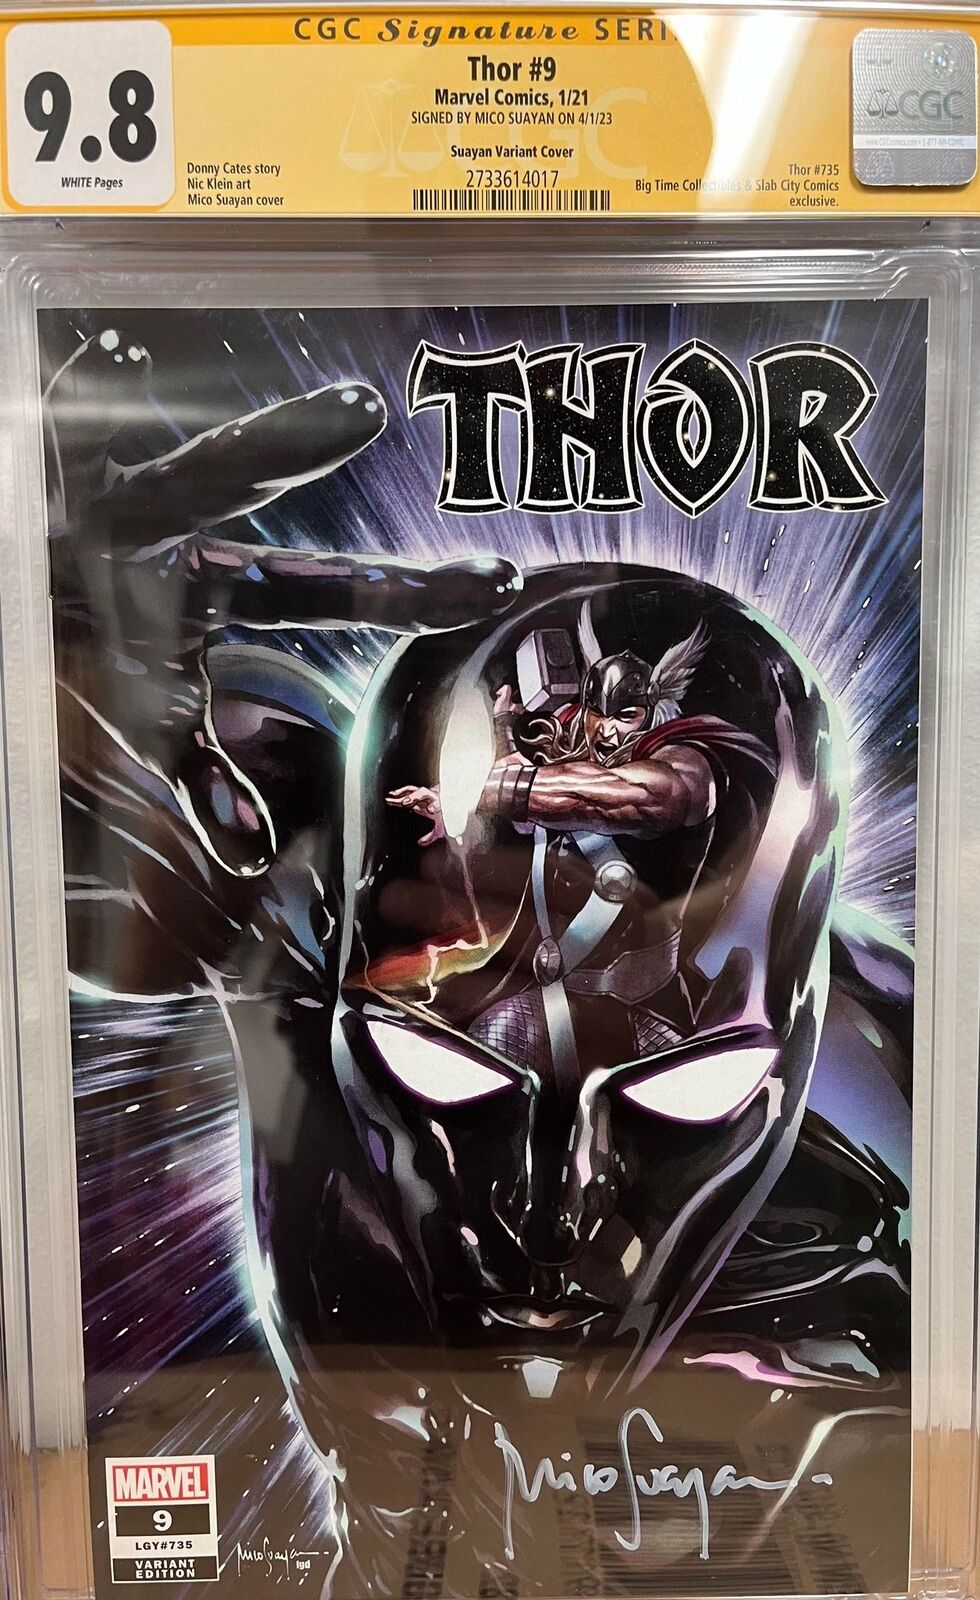 CGC 9.8 Signature Series Thor #9 Signed by Mico Suayan - Suayan Variant Cover